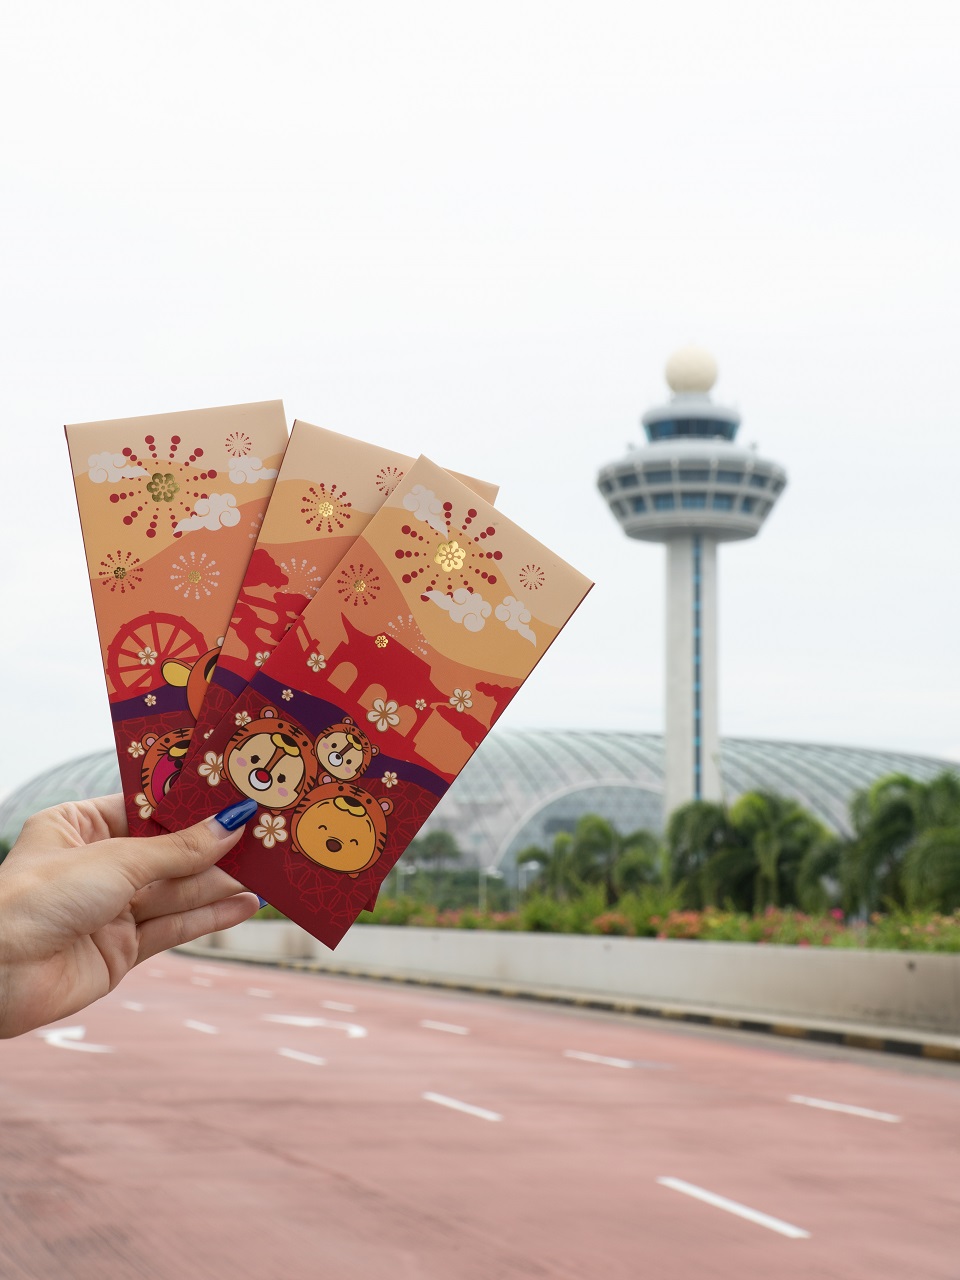 Disney Tsum Tsum red packet from Changi Airport